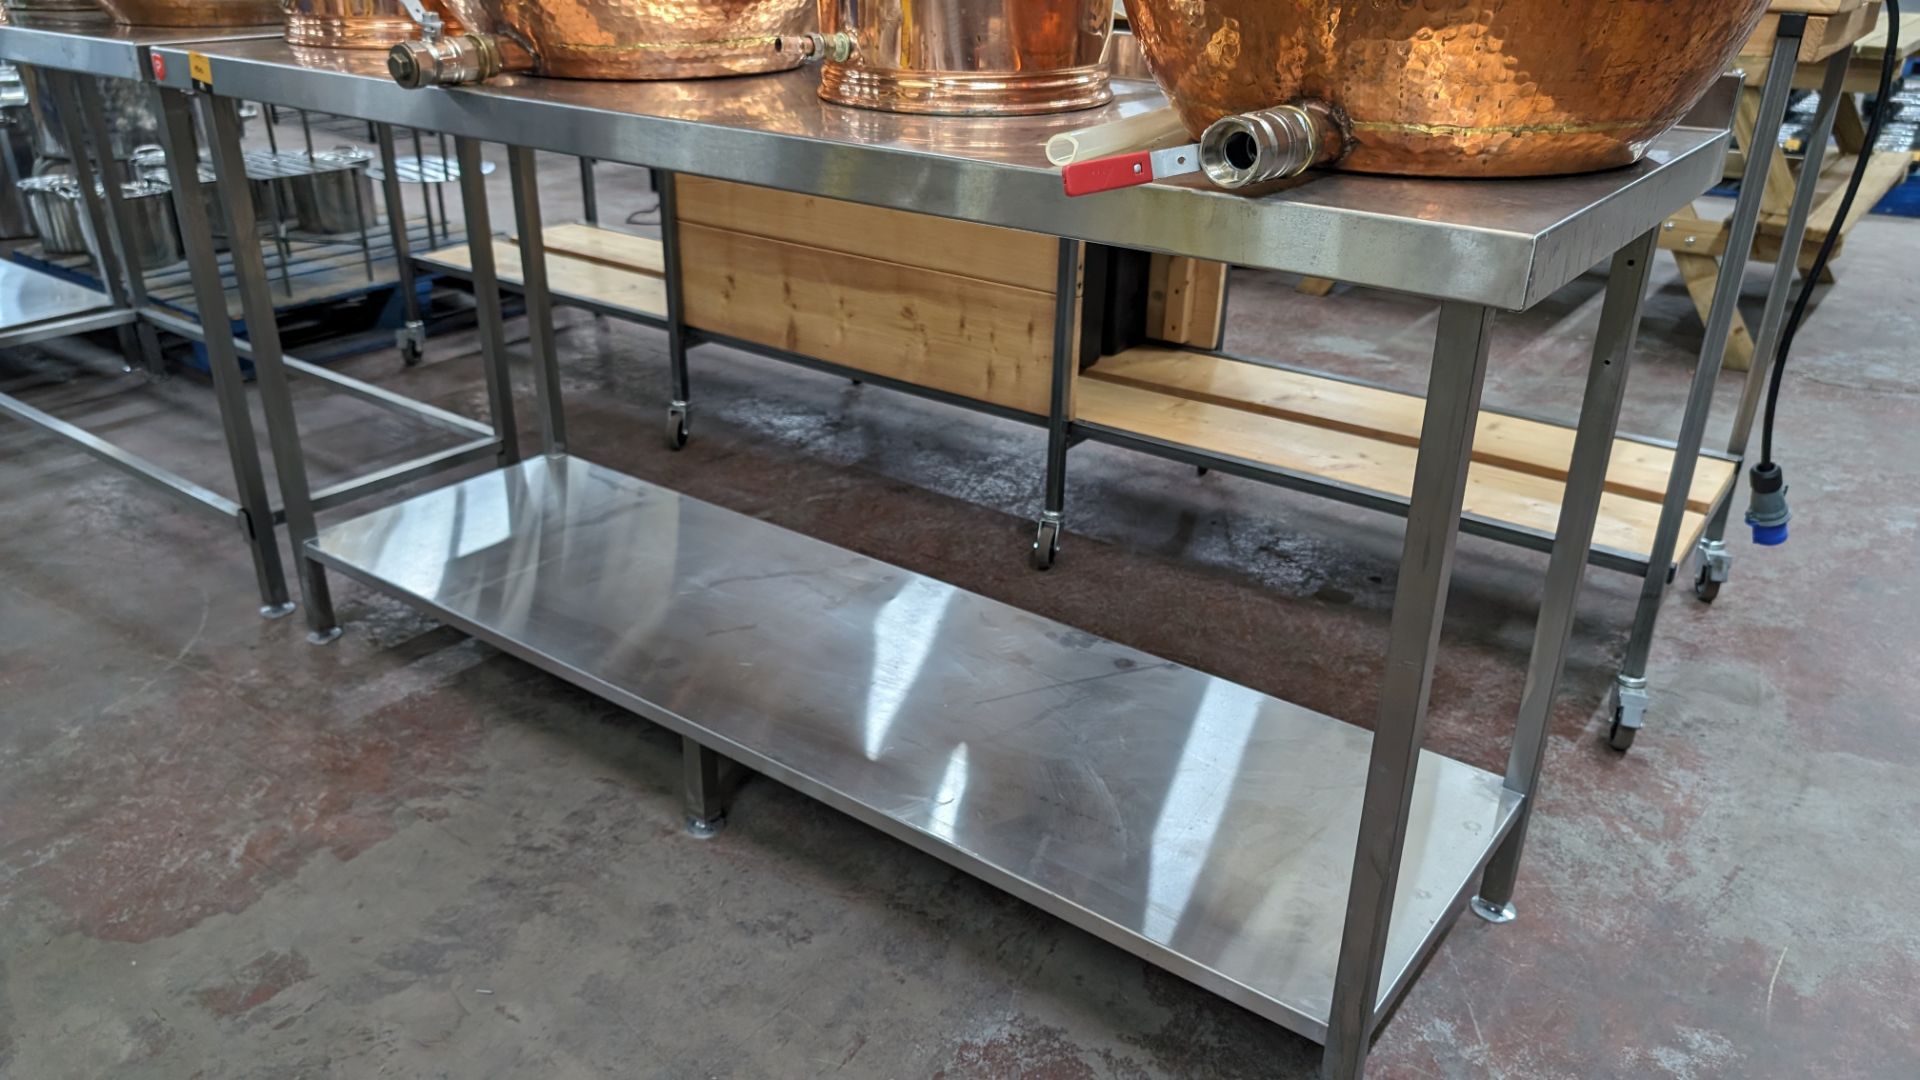 Stainless steel twin tier table with upstand at rear, max dimensions: 920mm x 600mm x 1800mm